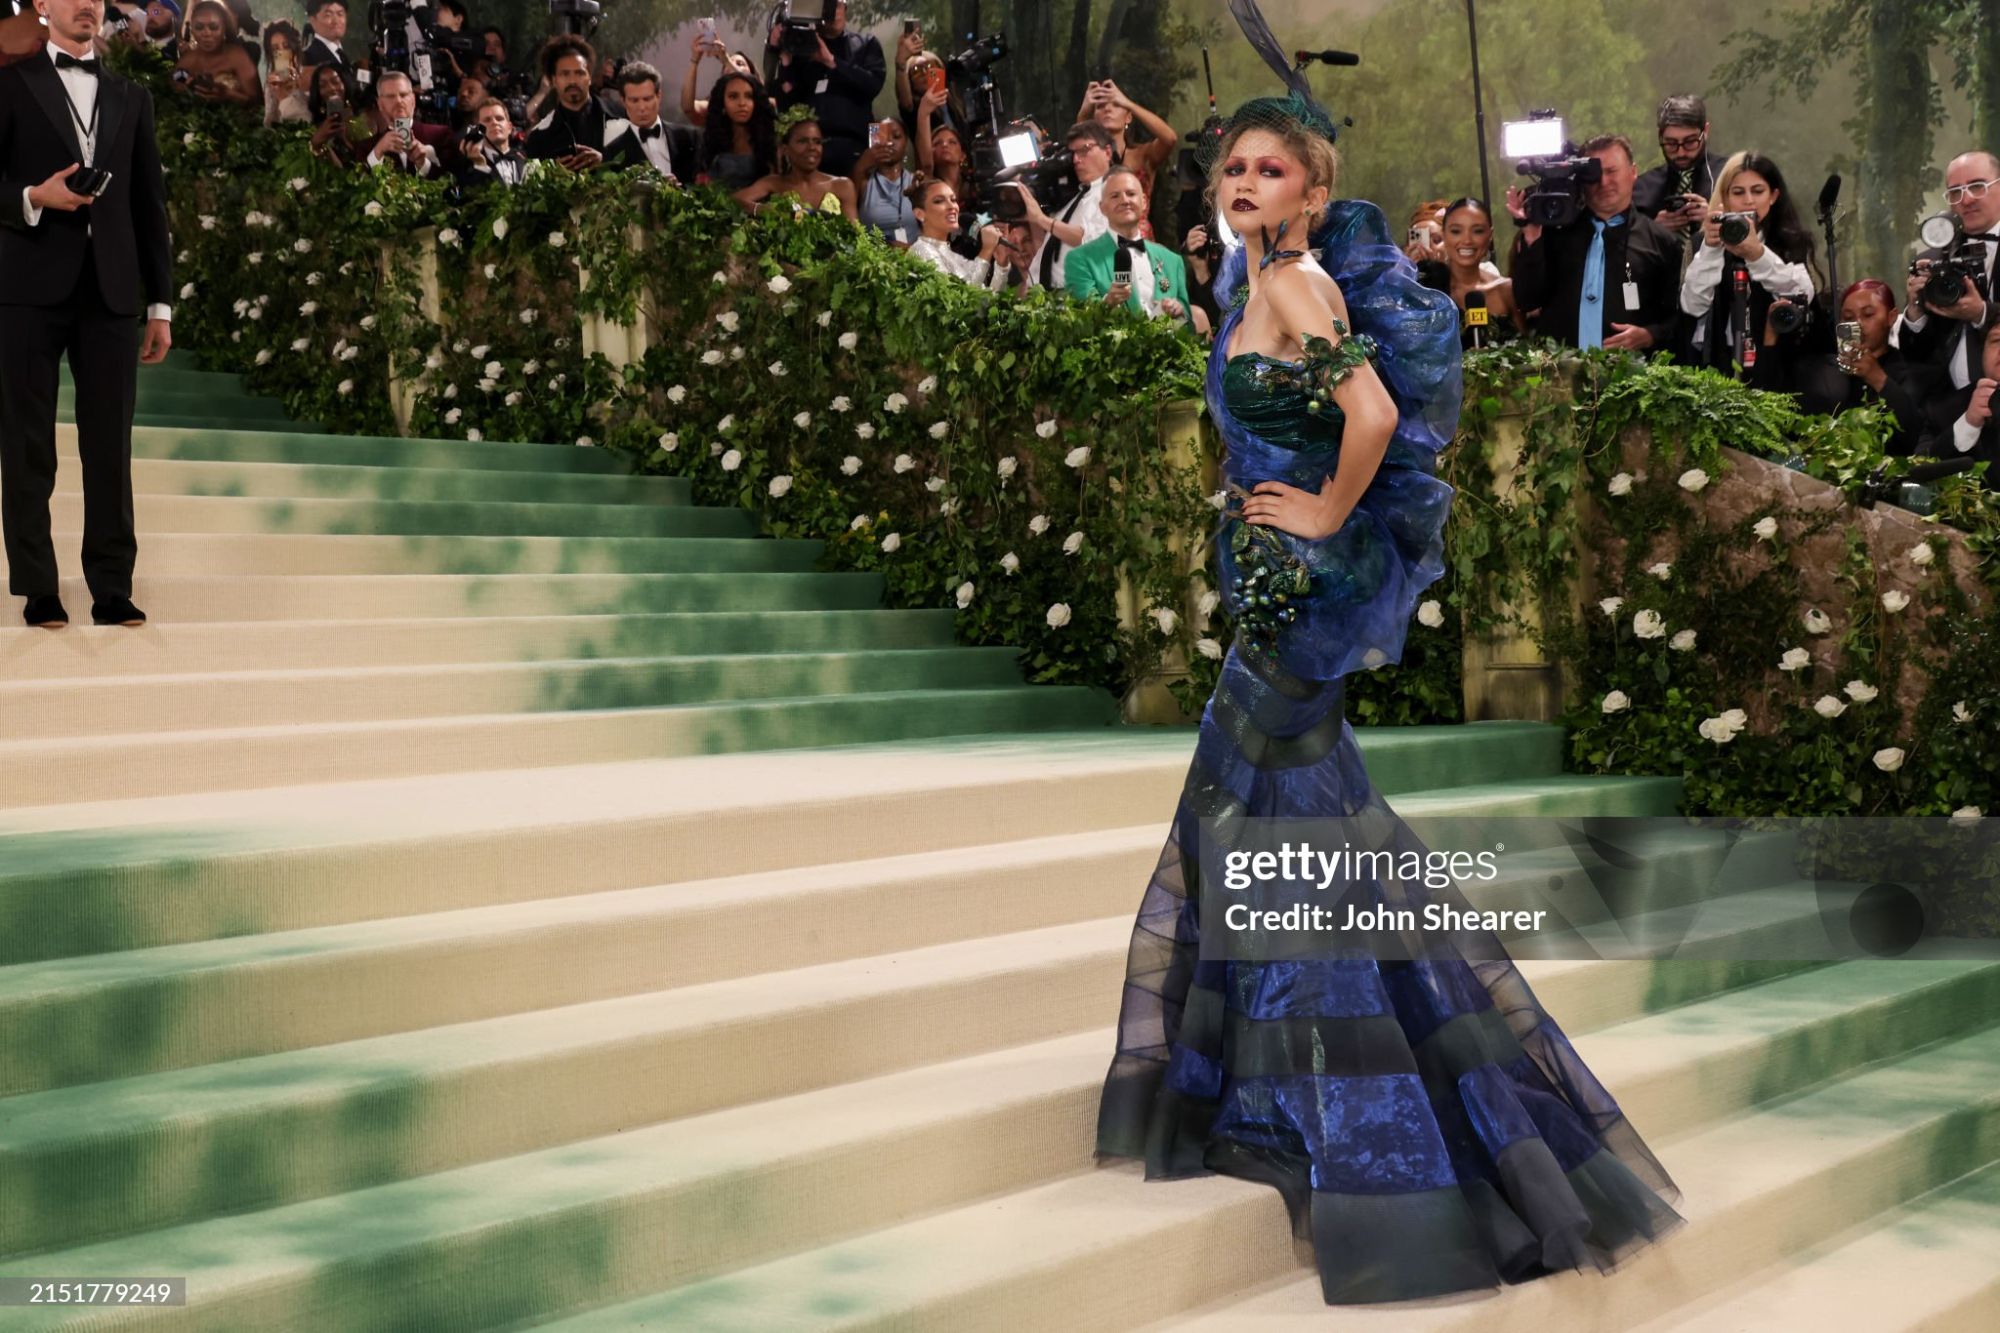 gettyimages-2151779249-2048x2048.jpg